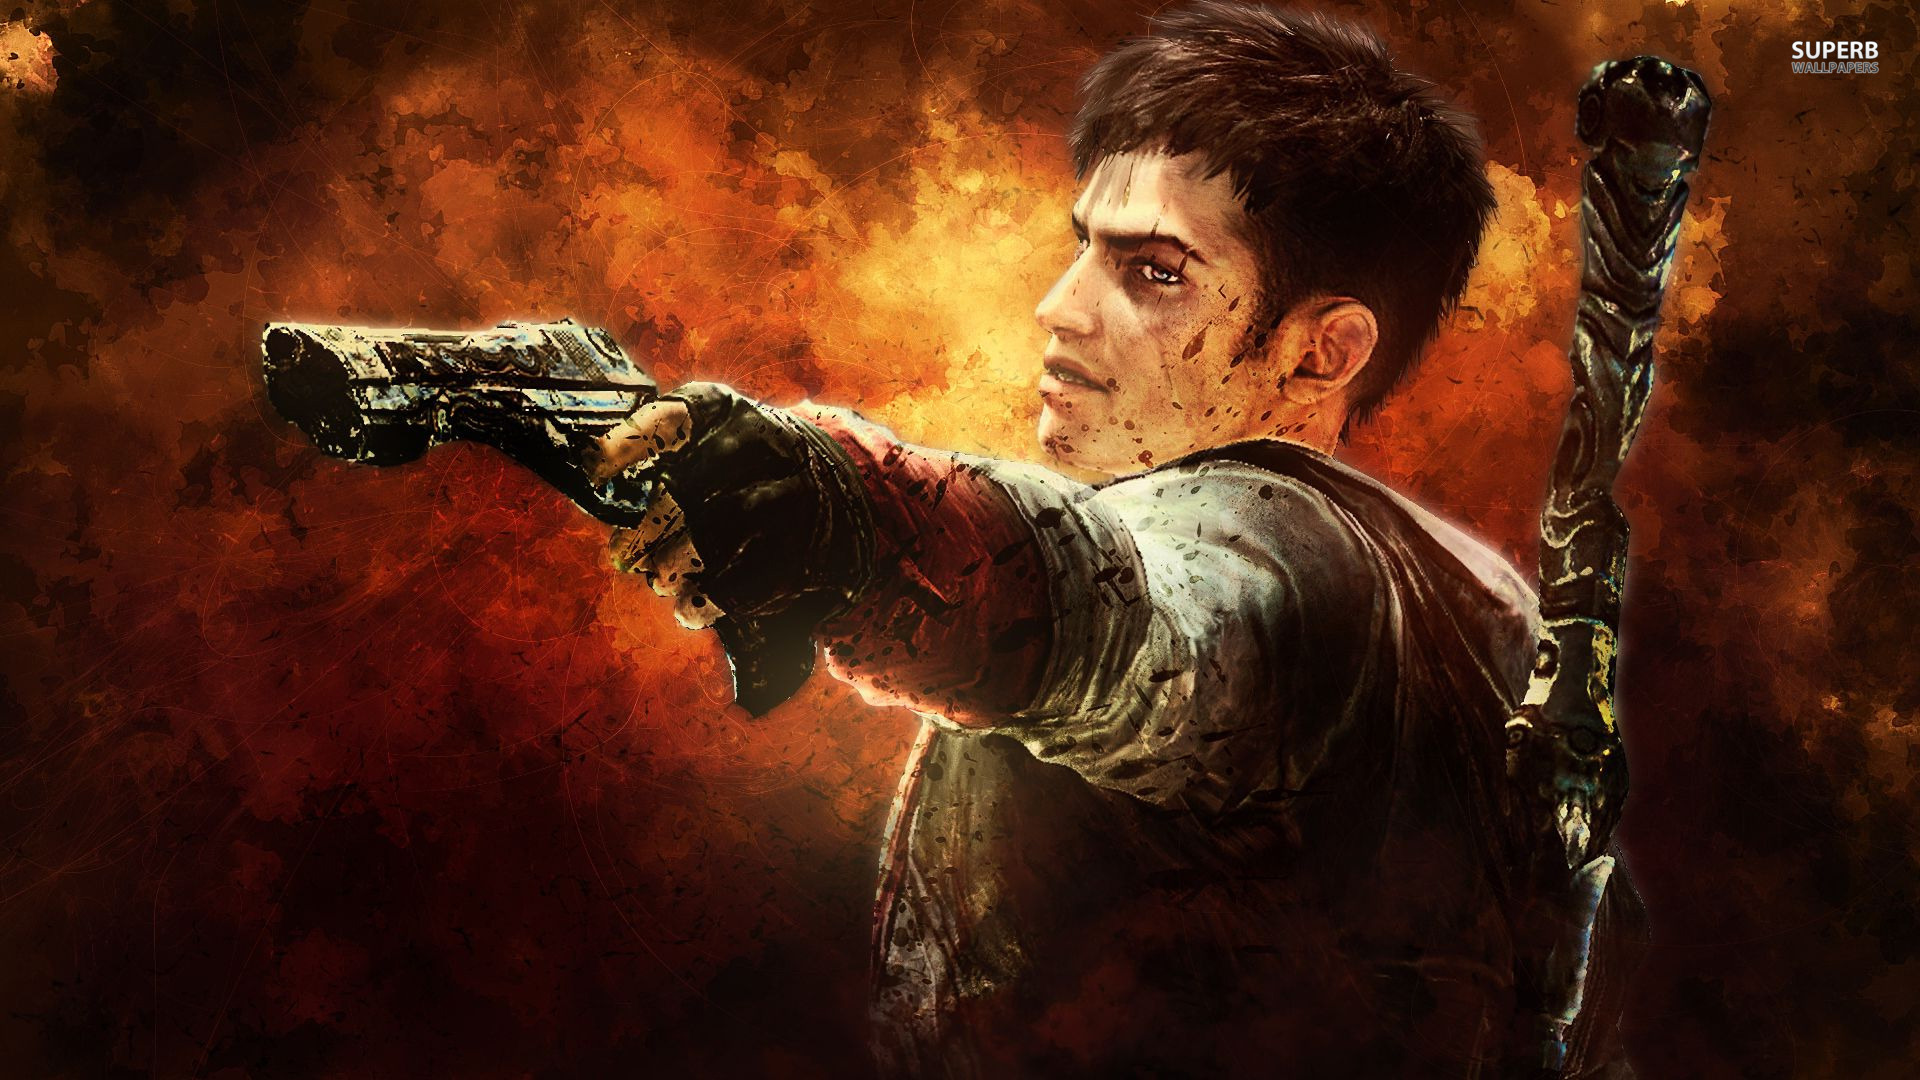 Dante Devil May Cry Wallpaper For Android | HD Wallpapers